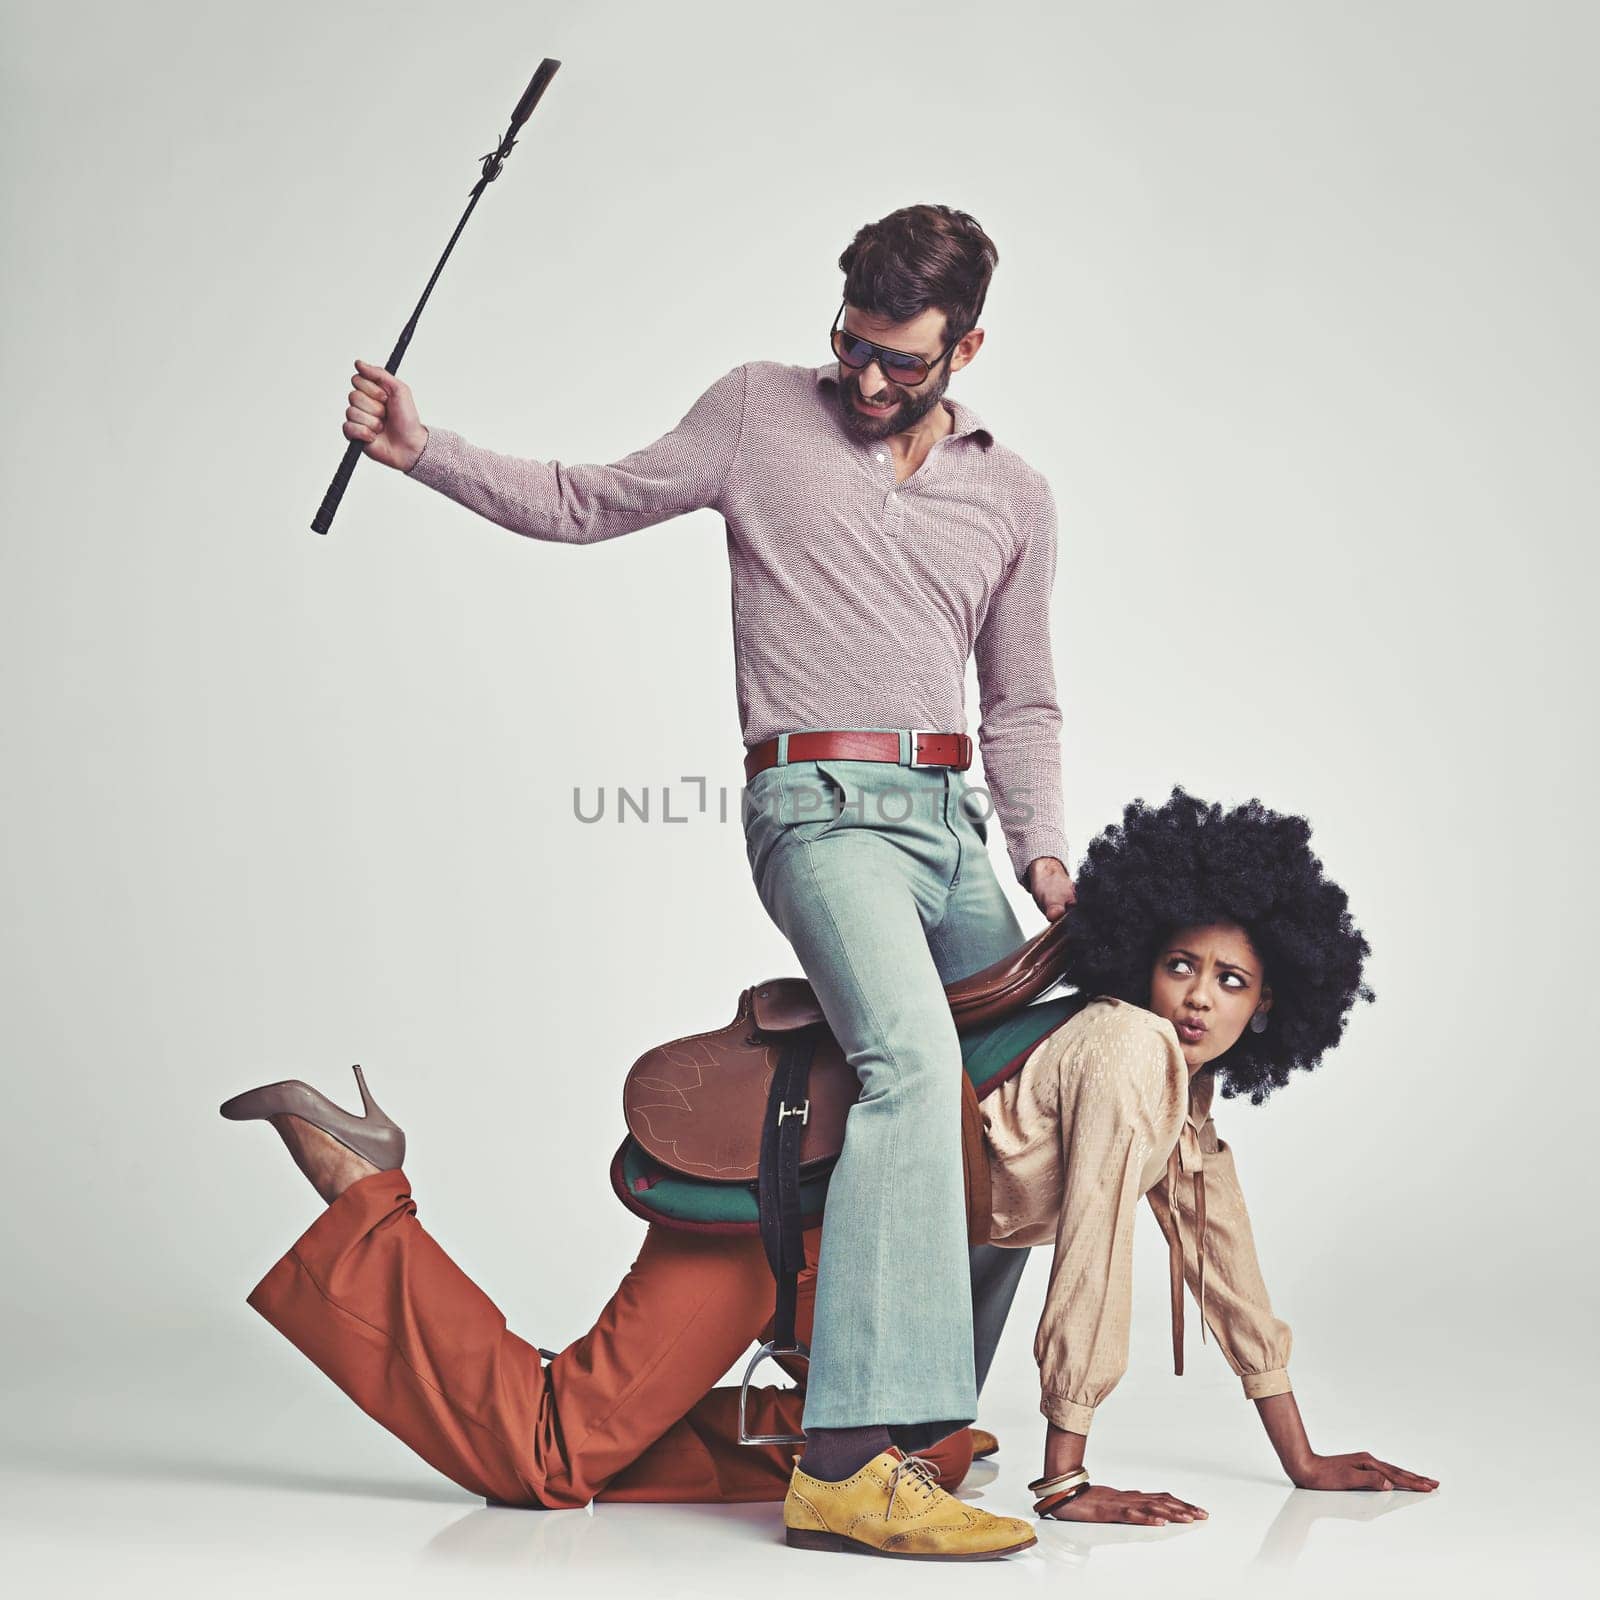 Retro, man and woman or riding crop in studio with piggyback, portrait and funny face for vintage style. Friends, people and 70s outfit with hipster clothes or comic expression with white background.